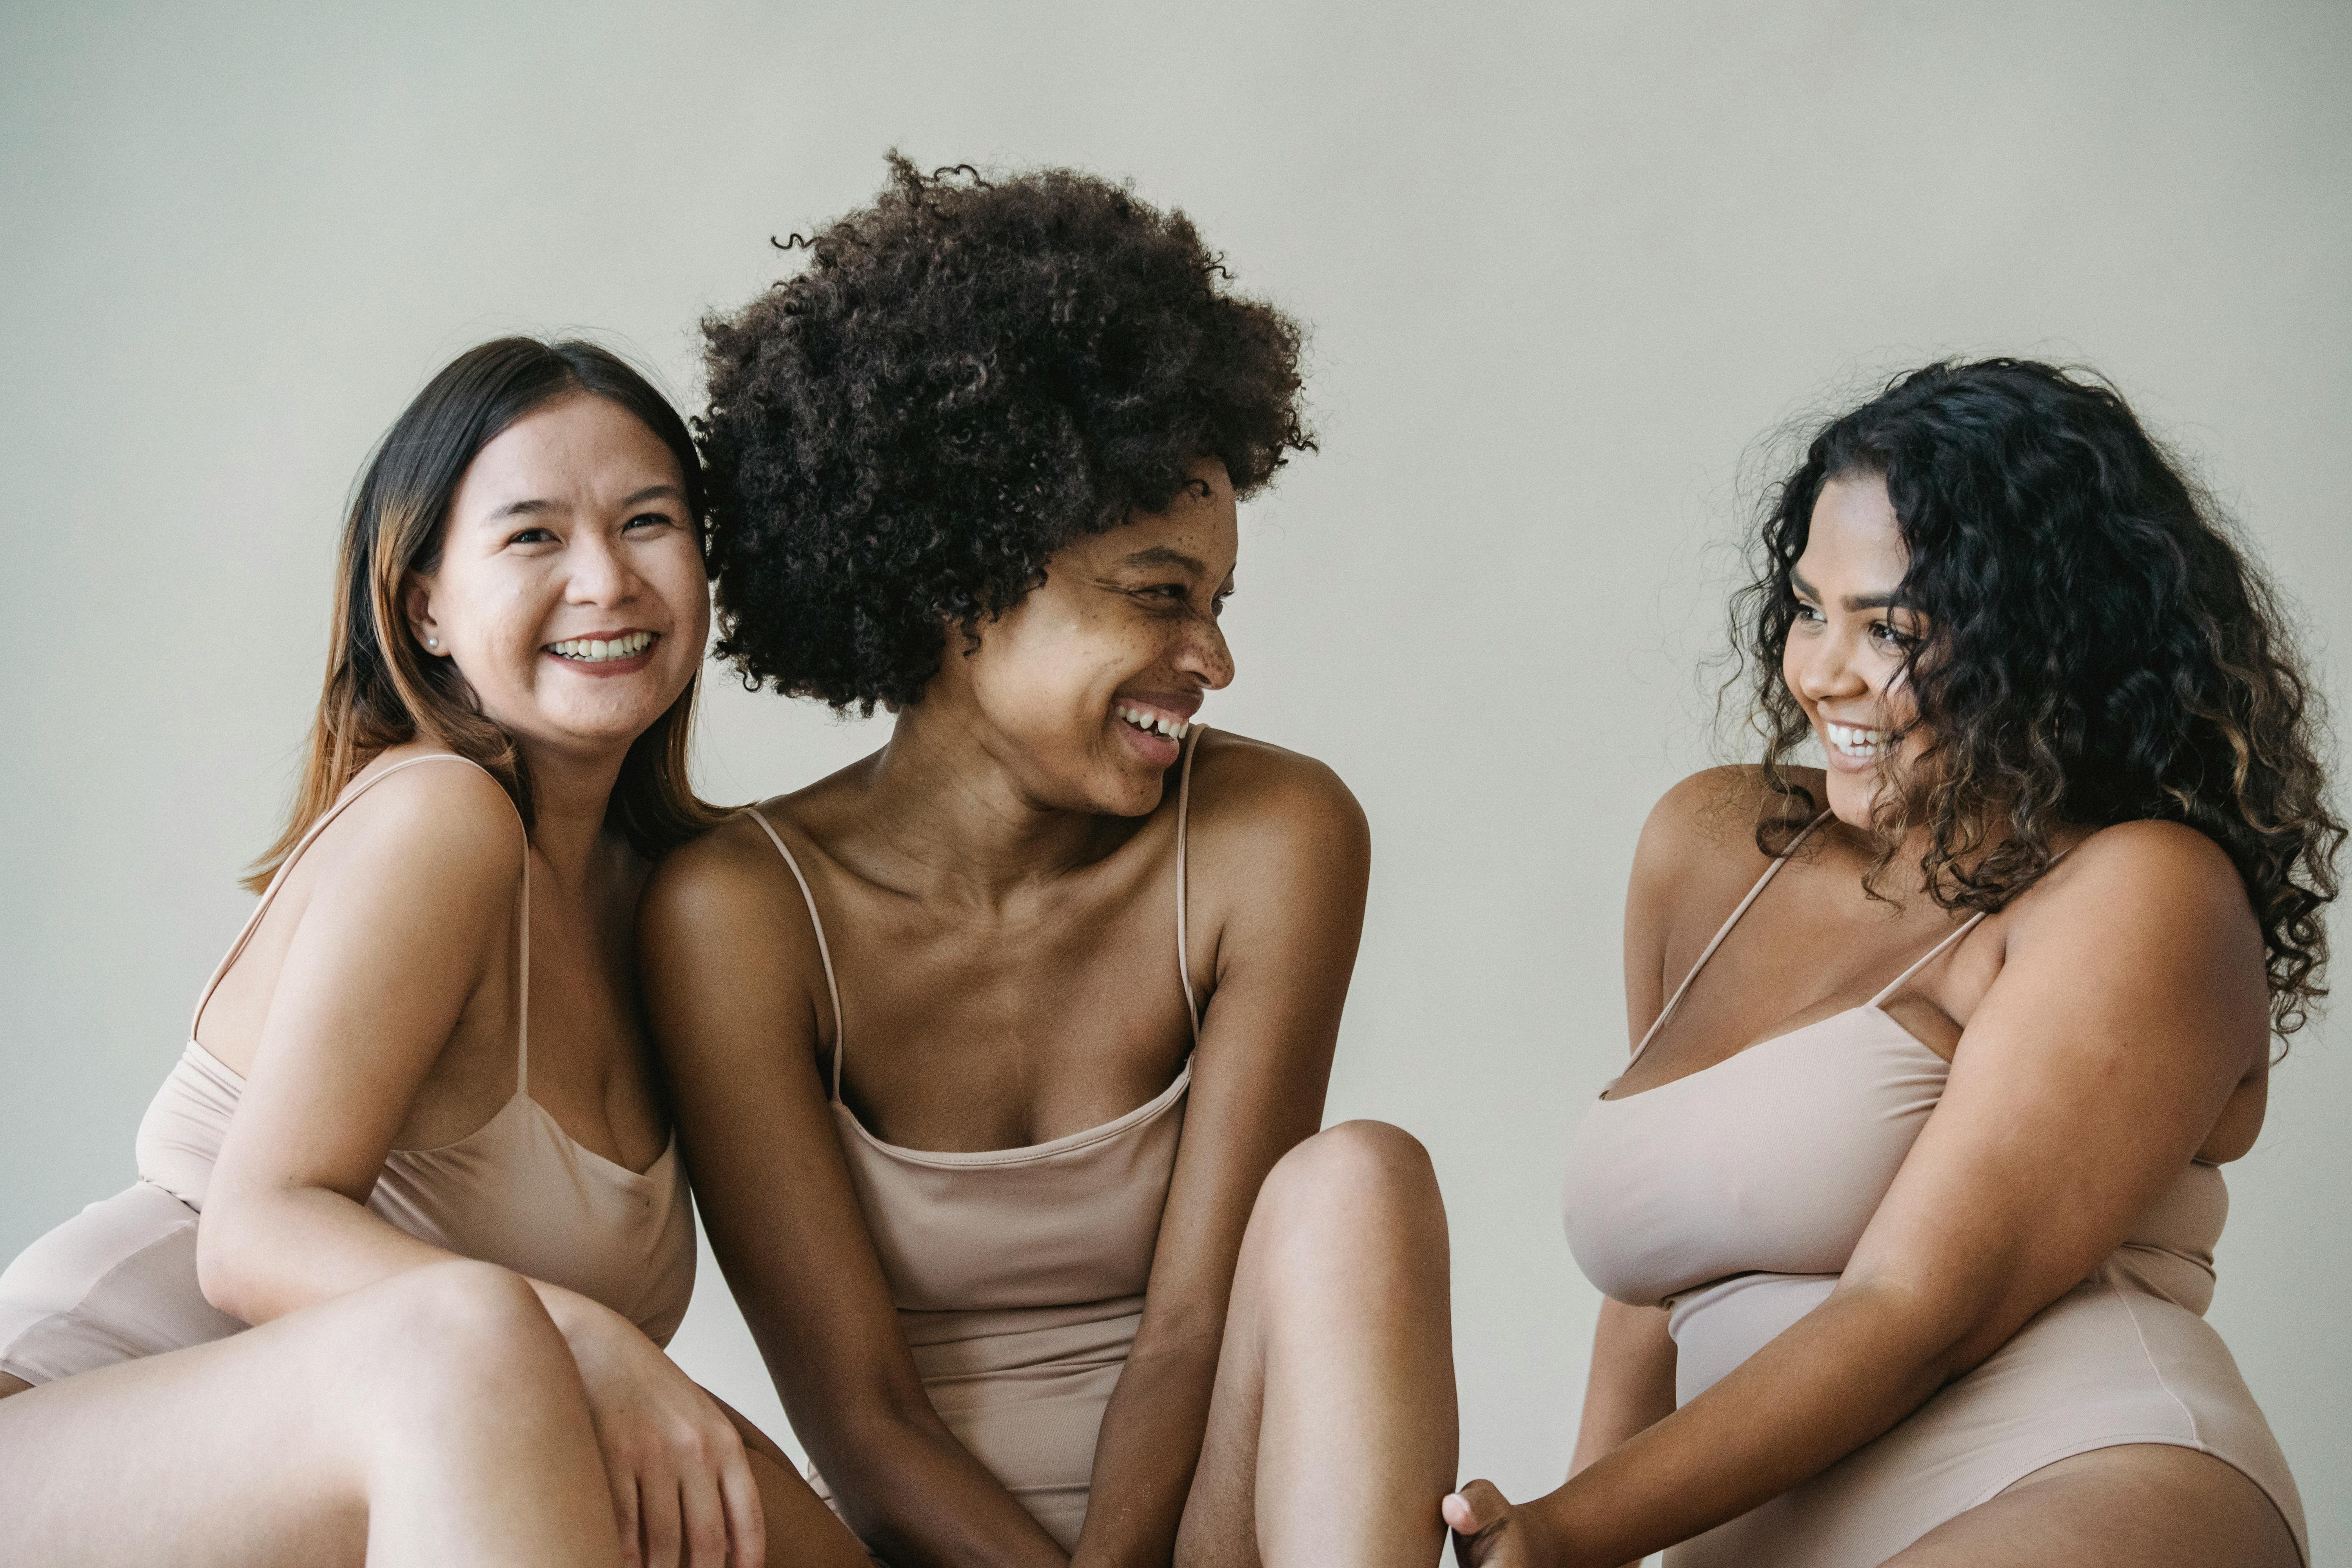 Women Posing in Nude Bodysuits Smiling · Free Stock Photo picture photo